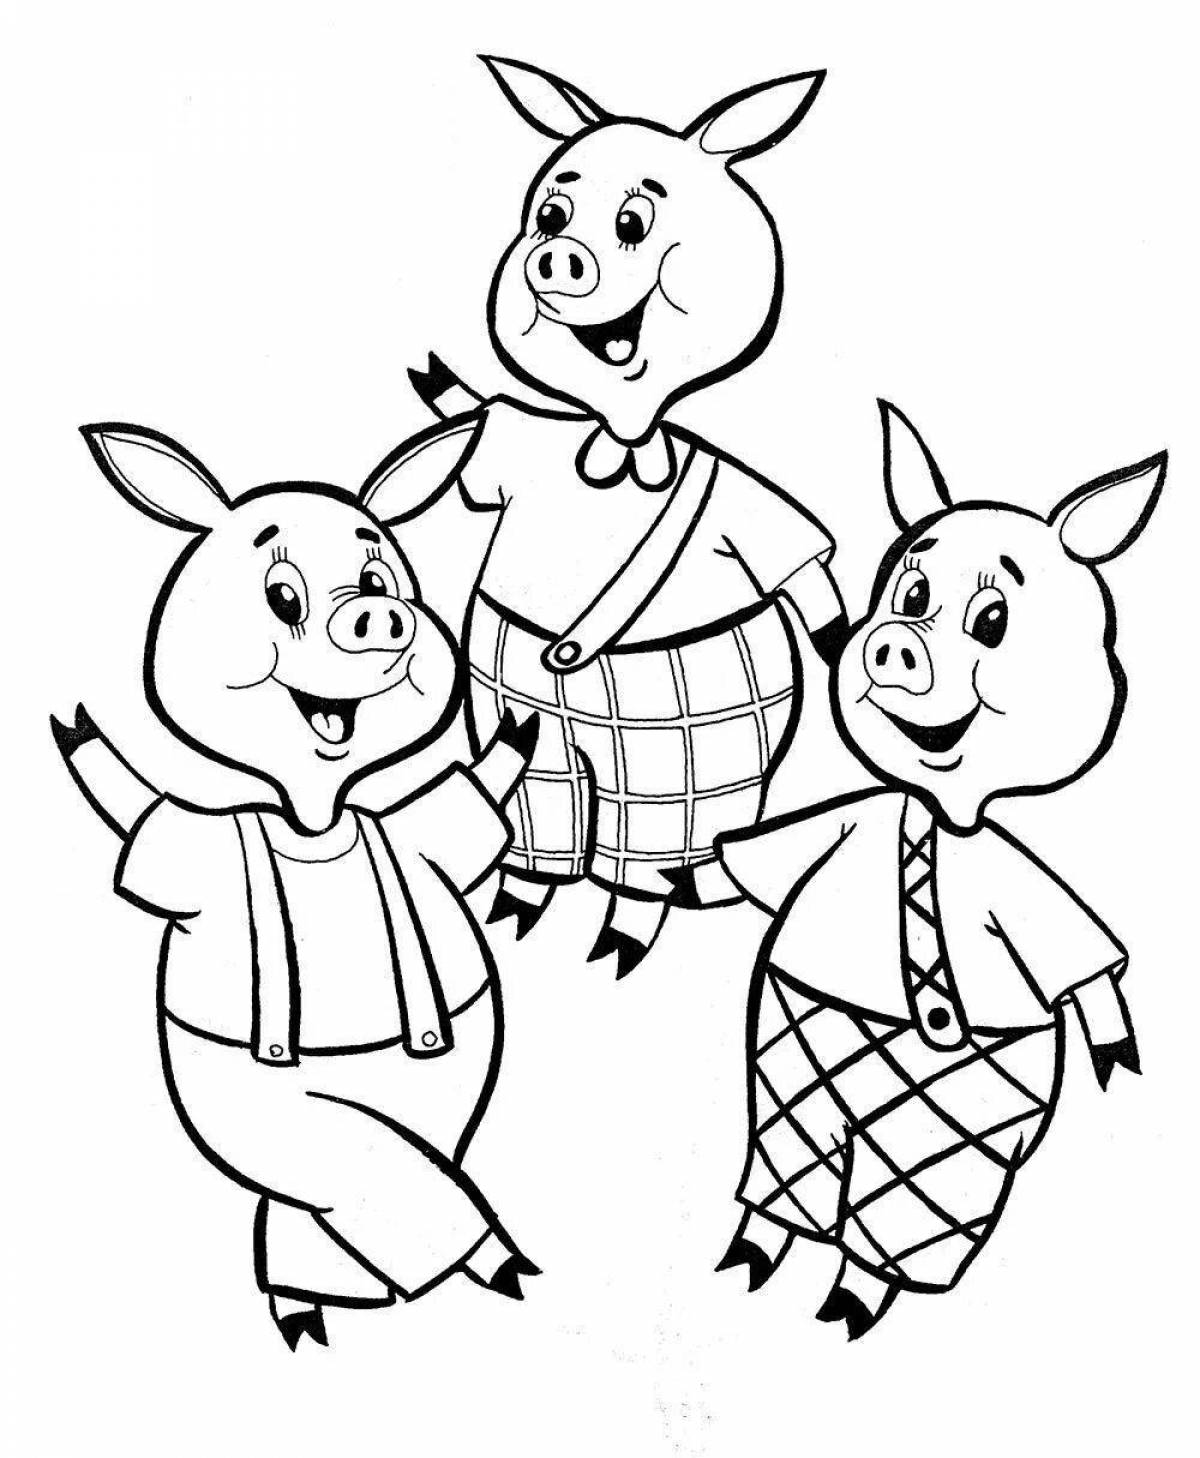 Amazing coloring page of the tale of the three little pigs